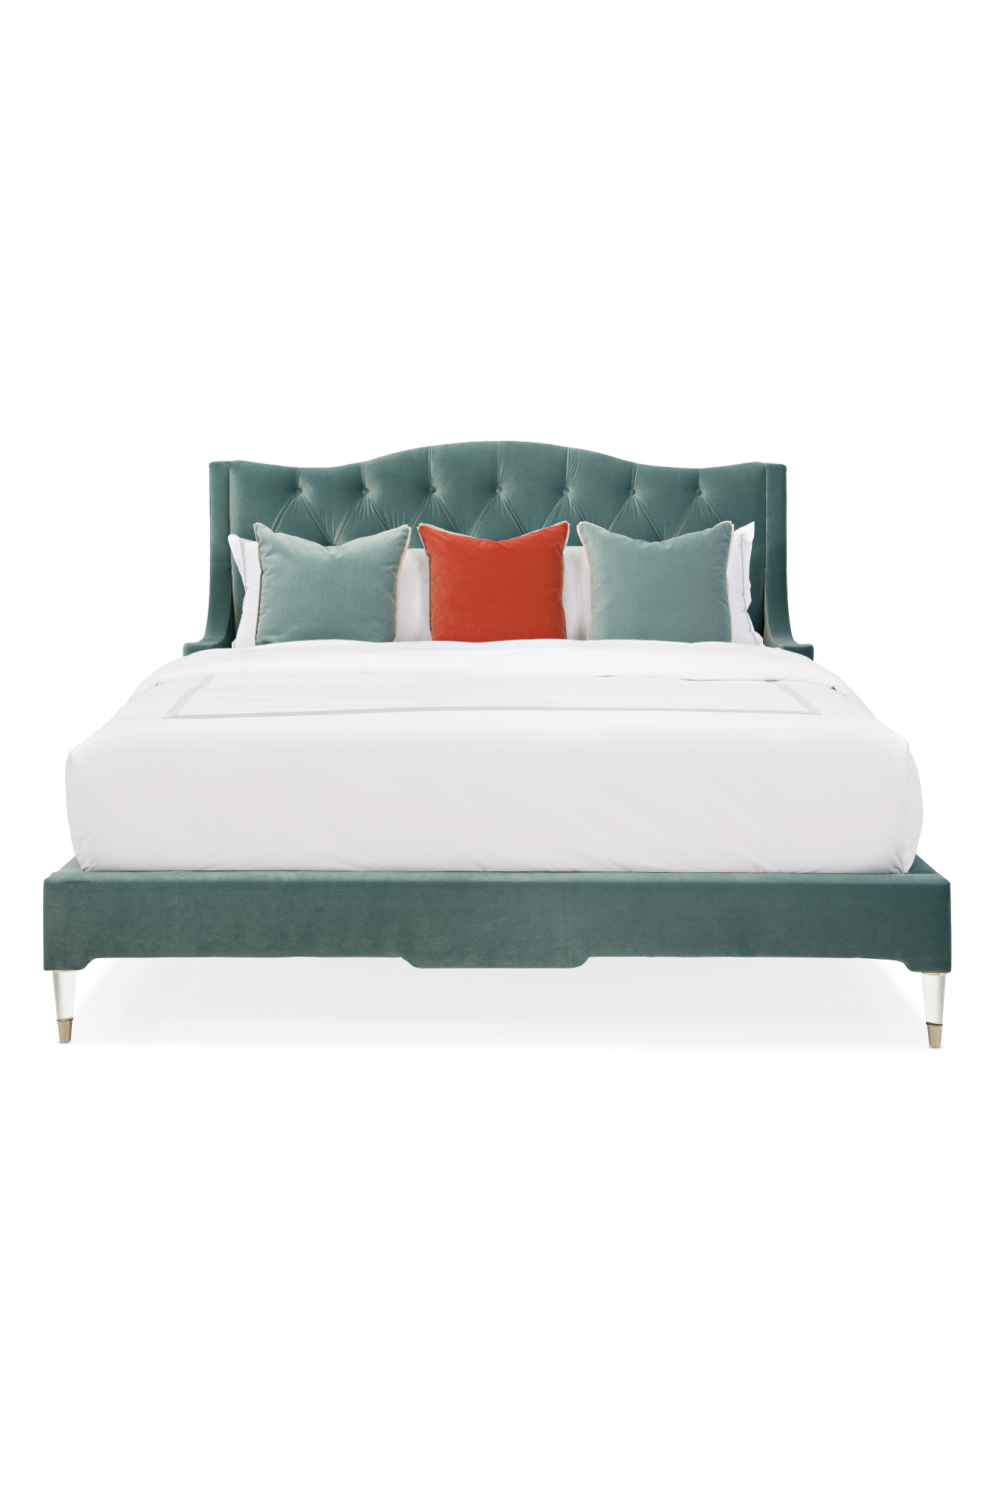 Blue Upholstered Tufted California King Bed | Caracole Do Not Disturb | Oroa.com